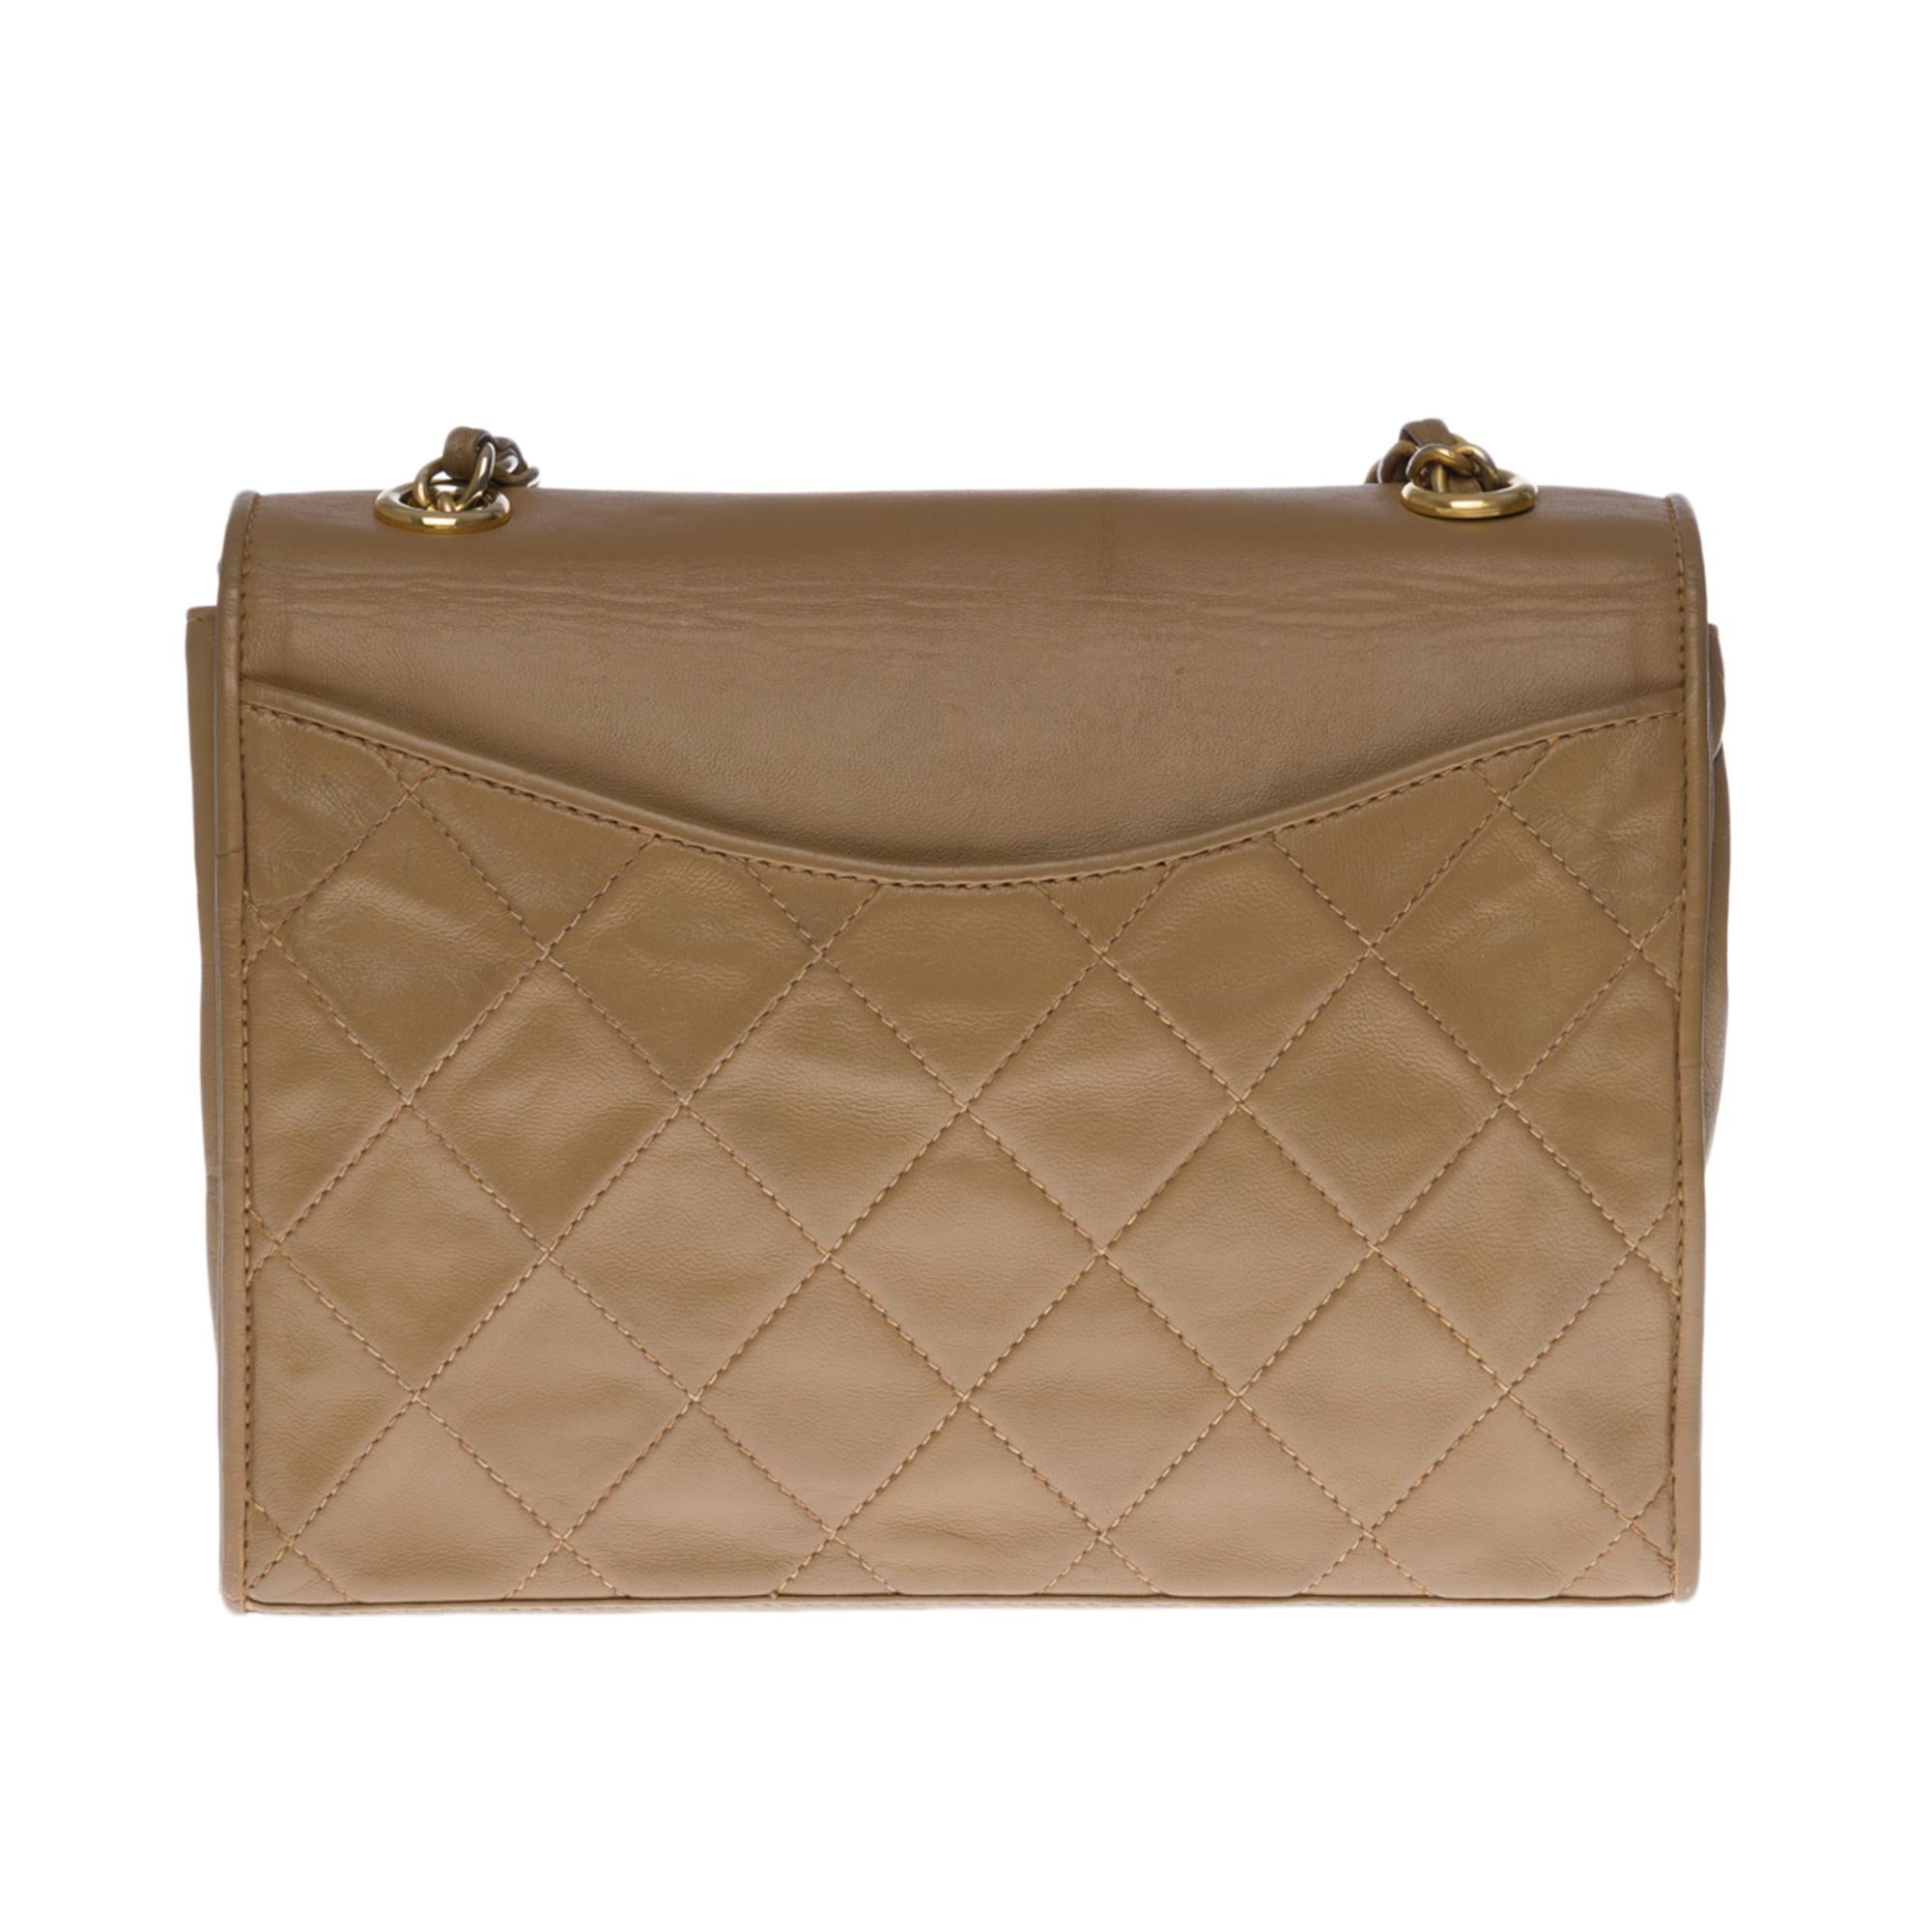 Lovely Chanel Classic Mini Full Flap bag in taupe quilted lambskin leather, gold-tone metal hardware, taupe leather interlocking gold-tone metal chain for hand, shoulder or shoulder support.
Closure by flap and snap button.
Lining in beige leather,